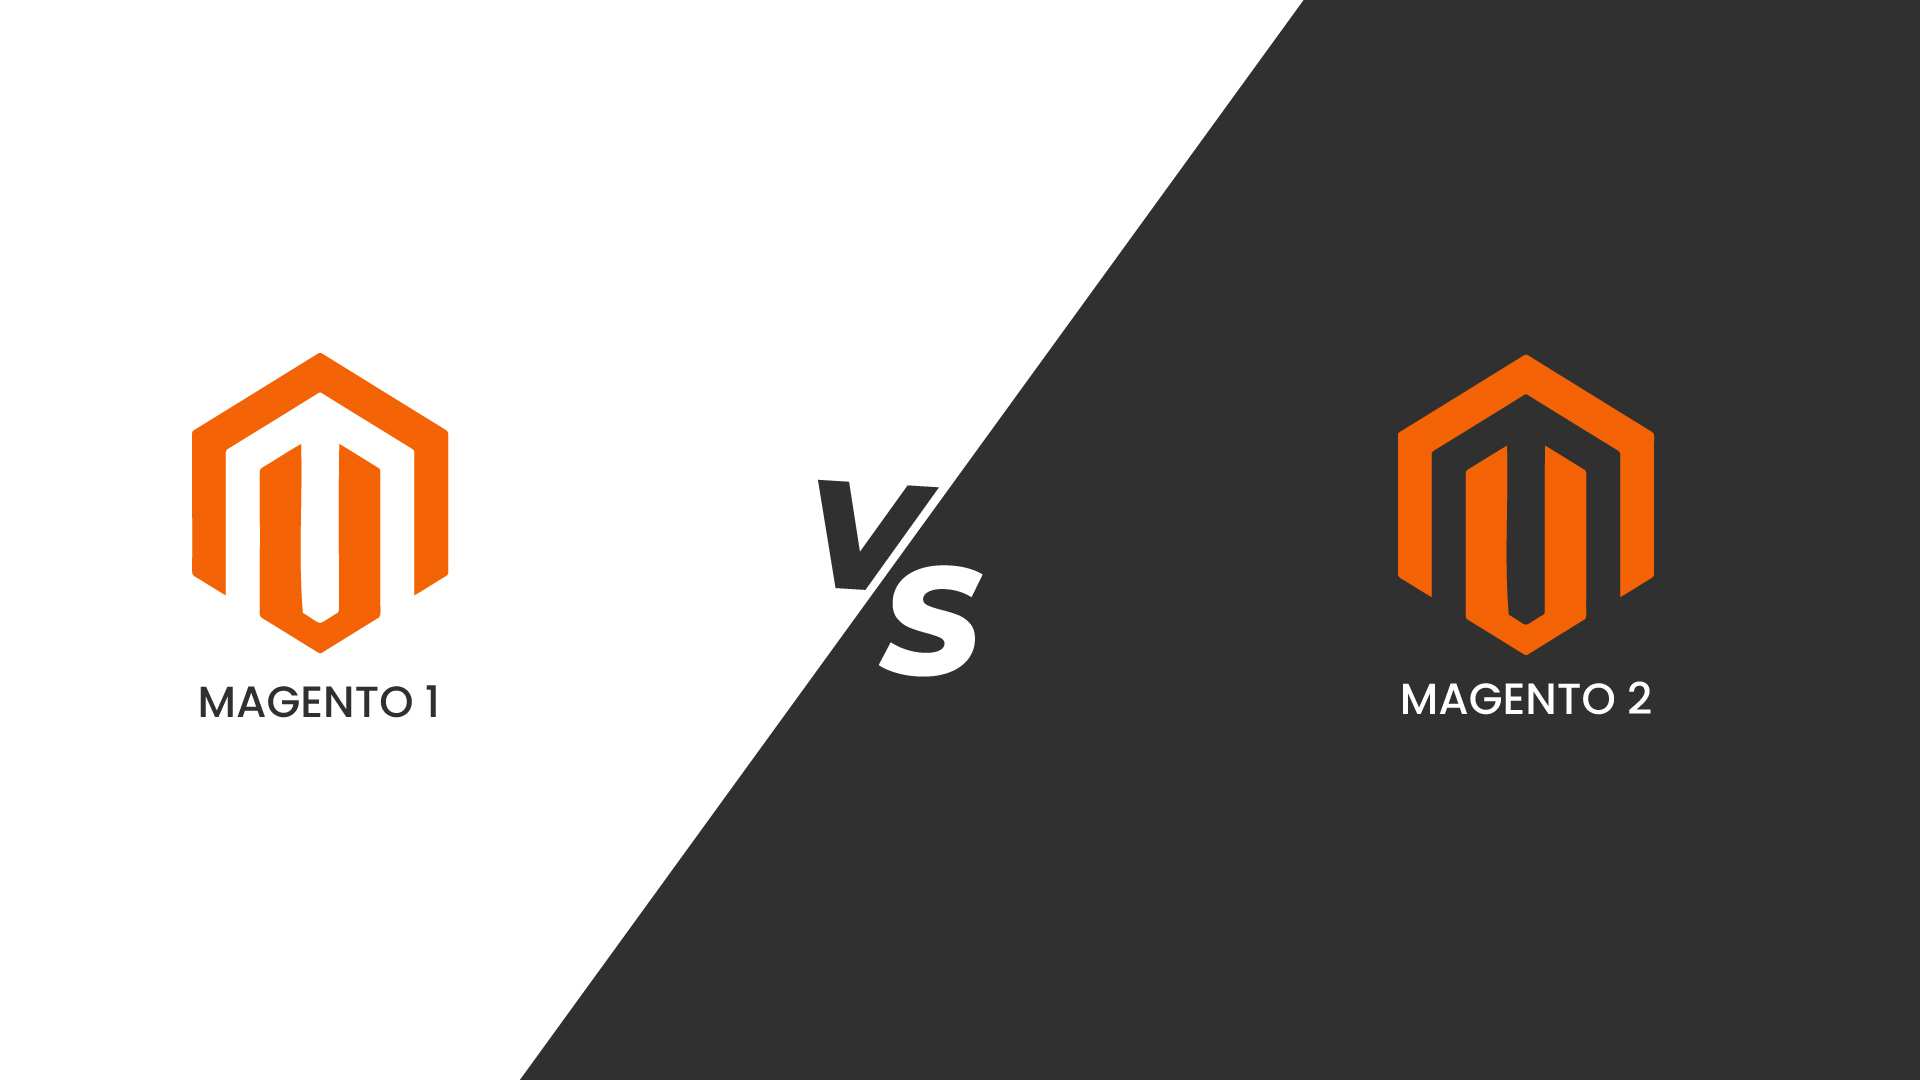 Why do You Need to Migrate from Magento 1 to Magento 2?